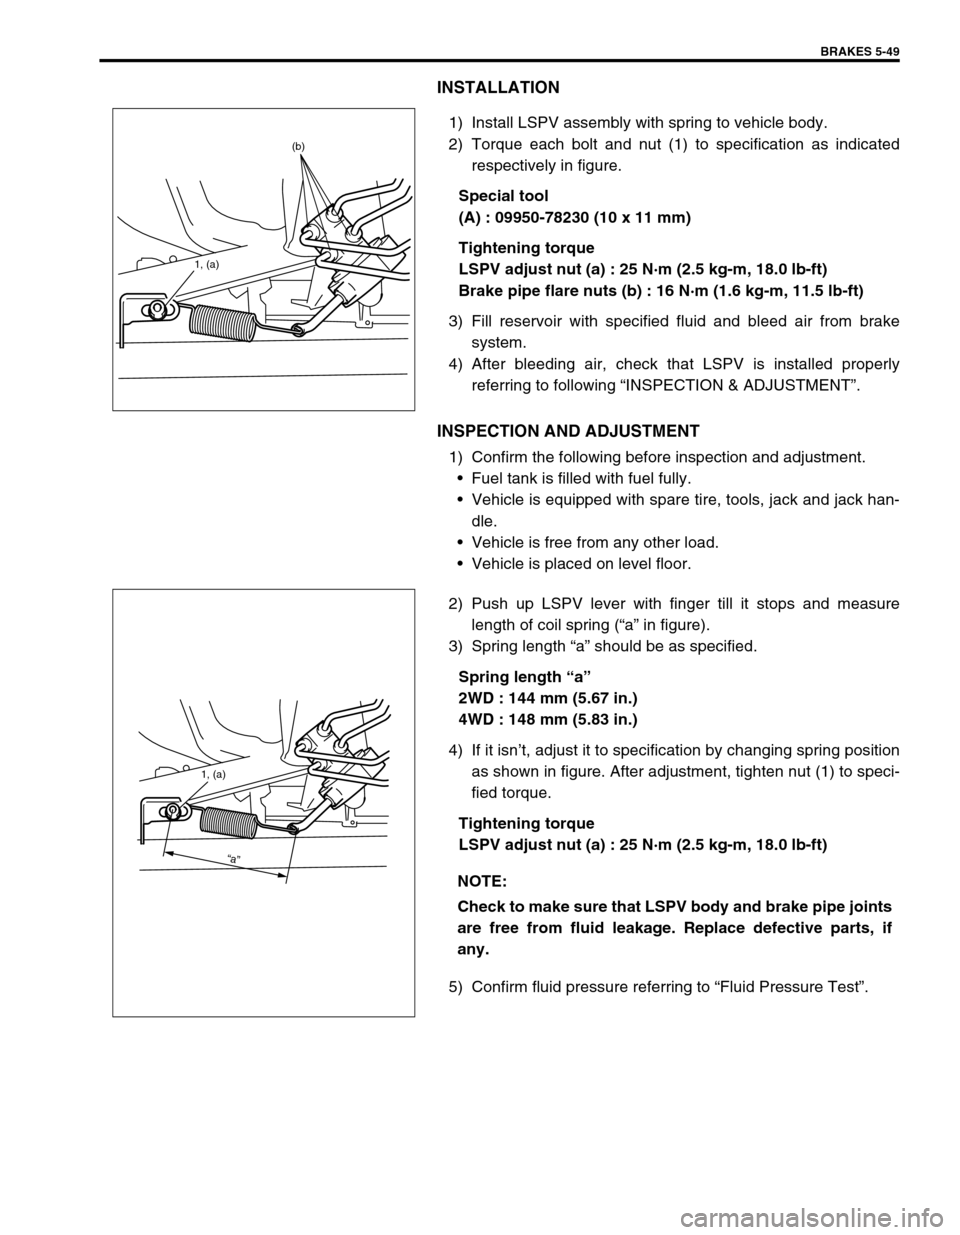 SUZUKI SWIFT 2000 1.G RG413 Service Workshop Manual BRAKES 5-49
INSTALLATION
1) Install LSPV assembly with spring to vehicle body.
2) Torque each bolt and nut (1) to specification as indicated
respectively in figure.
Special tool
(A) : 09950-78230 (10 